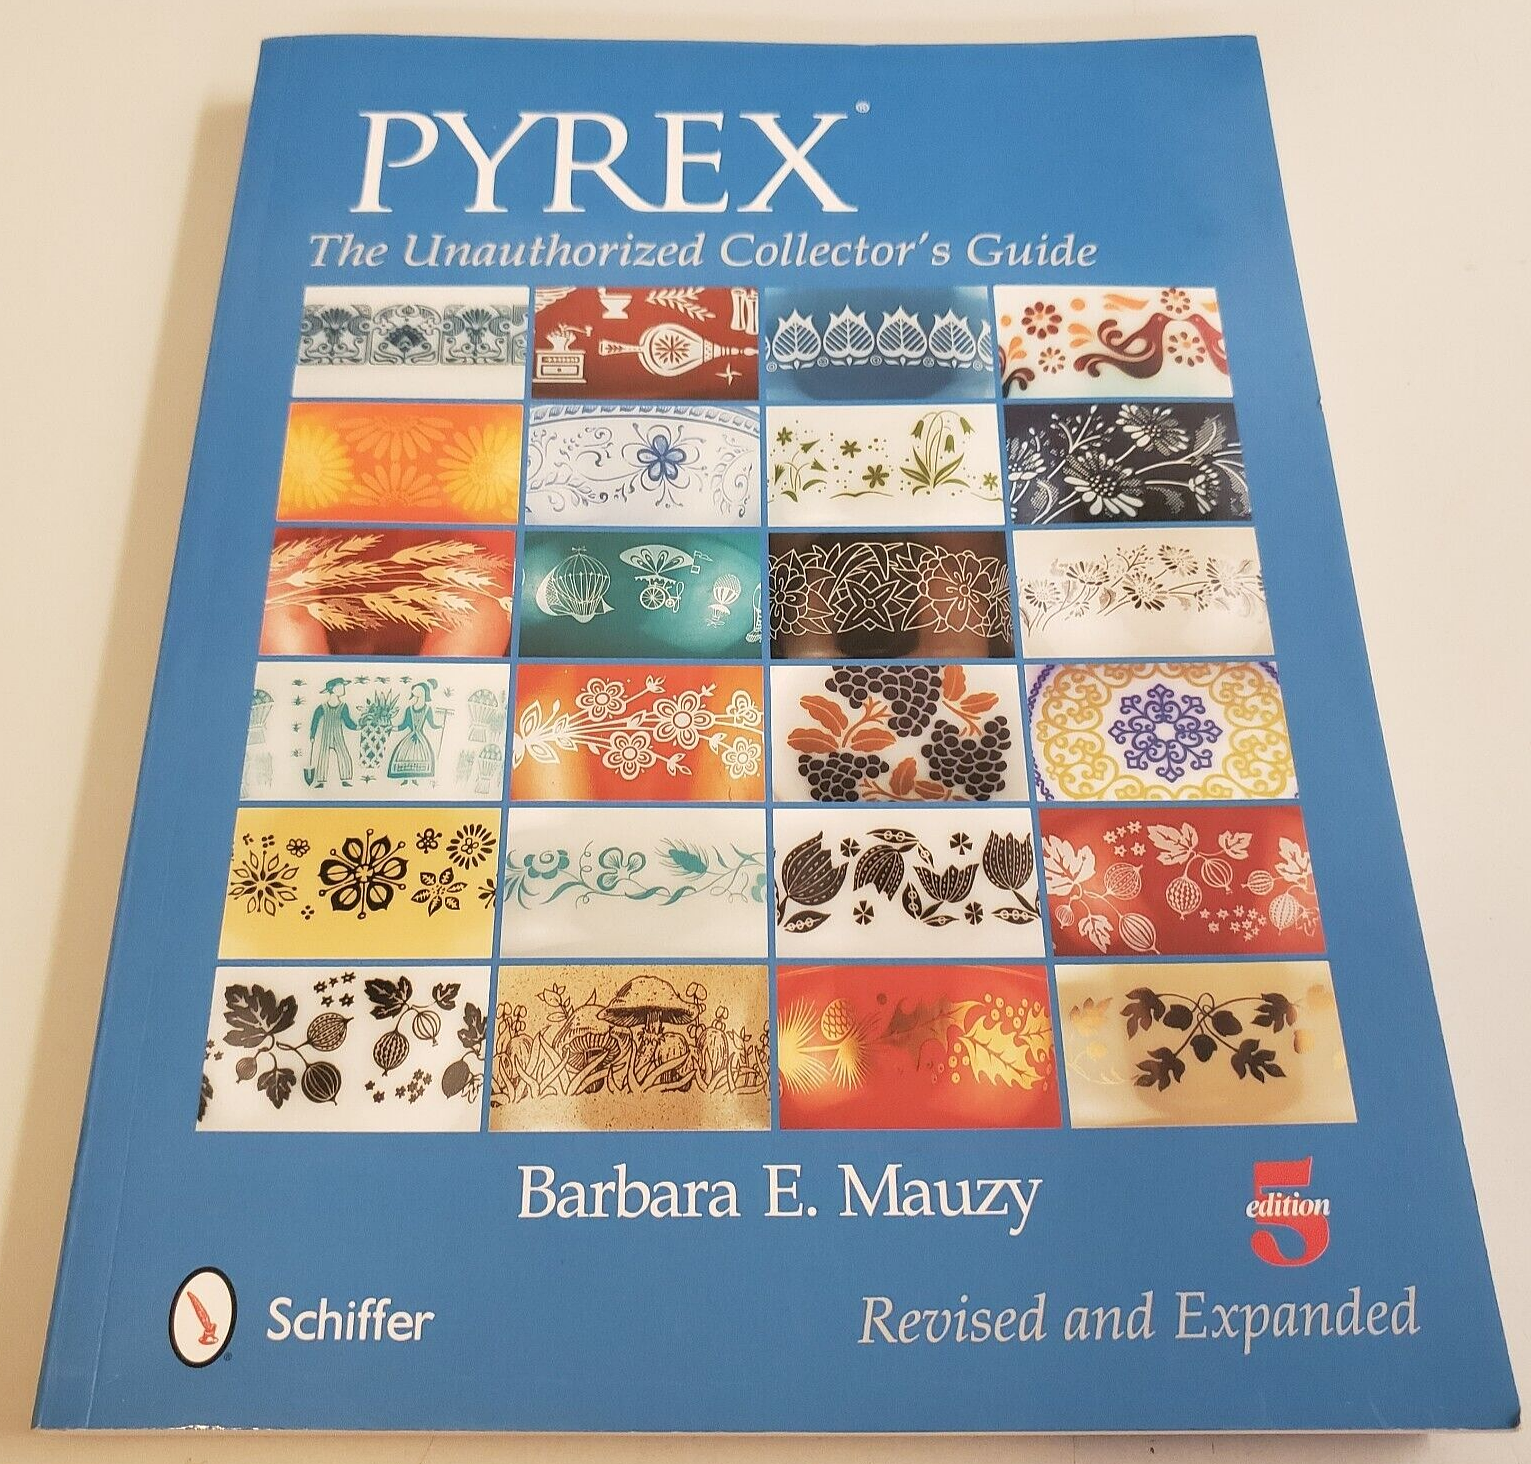 Primary image for PYREX: THE UNAUTHORIZED COLLECTOR'S GUIDE Mauzy 5th Revised Edition 2014 SC BOOK